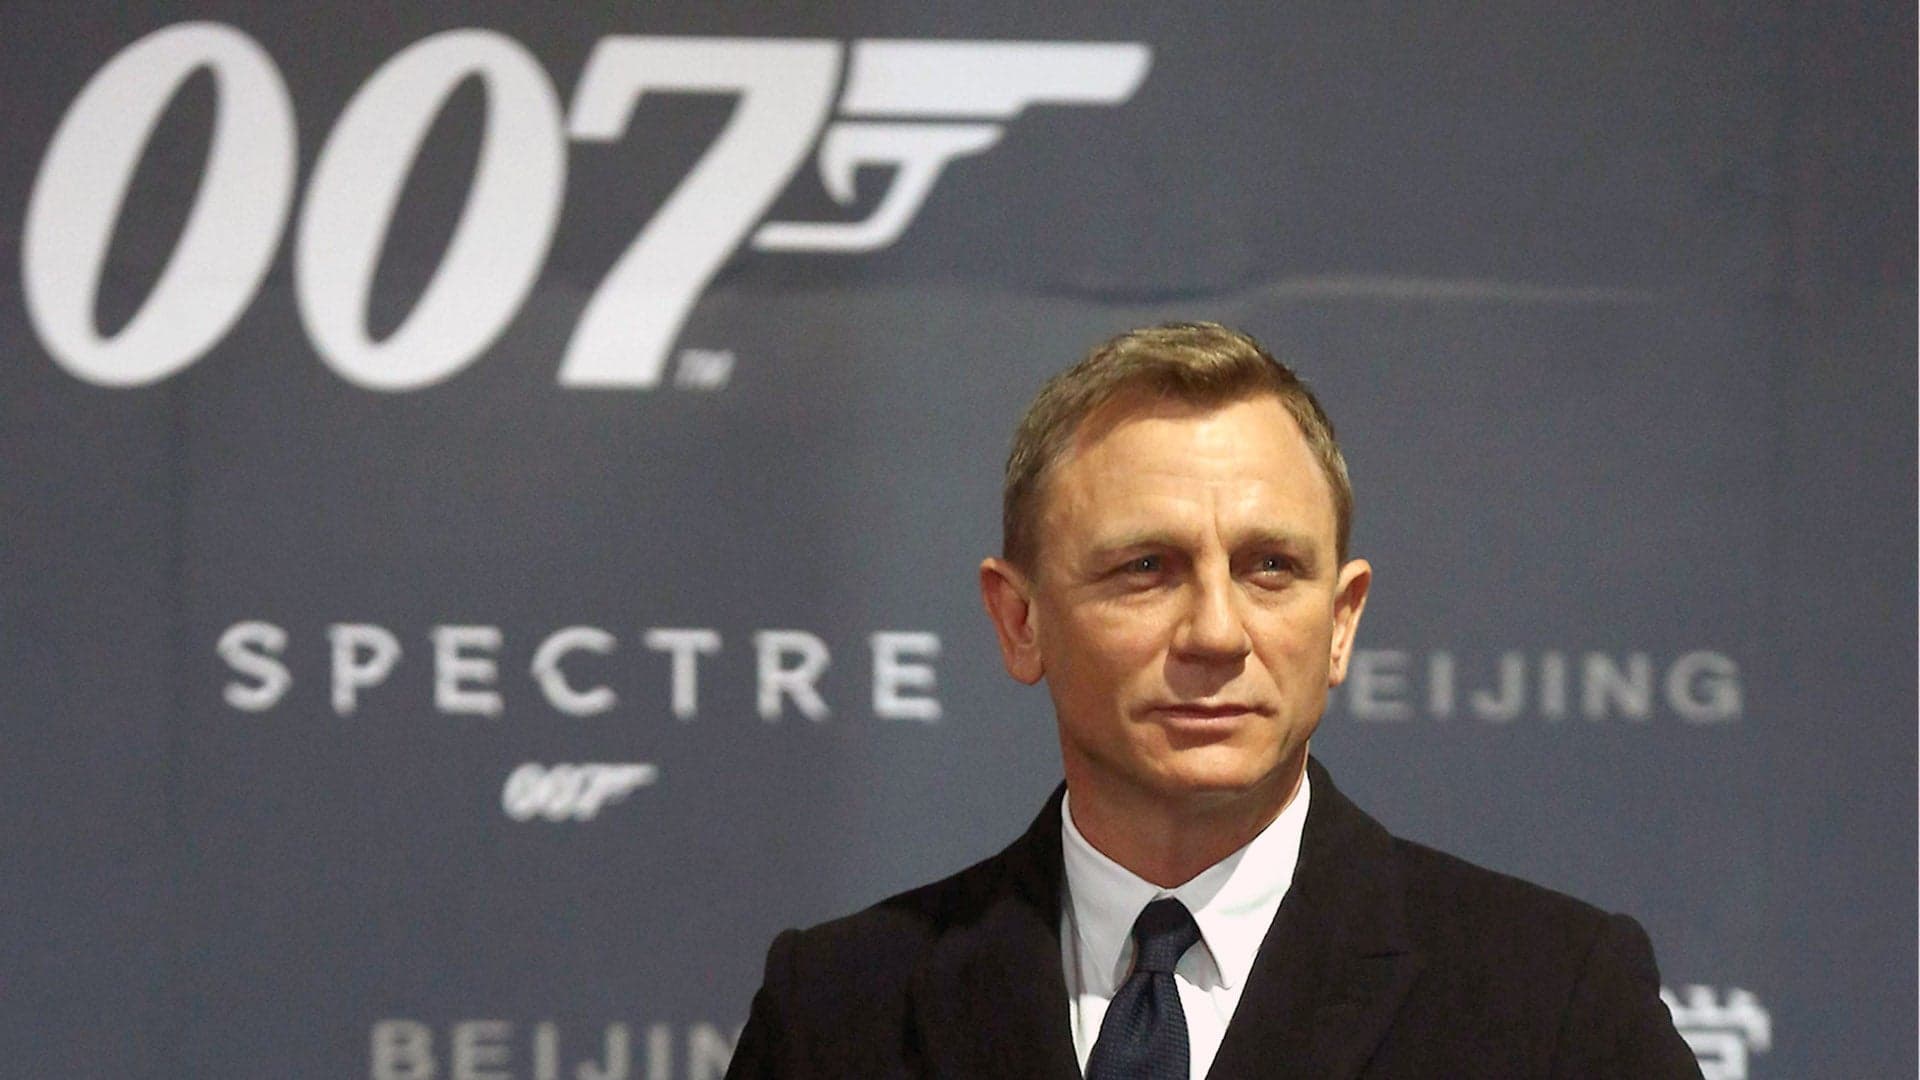 James Bond Will Drive an Electric Aston Martin in the Next 007 Film: Report